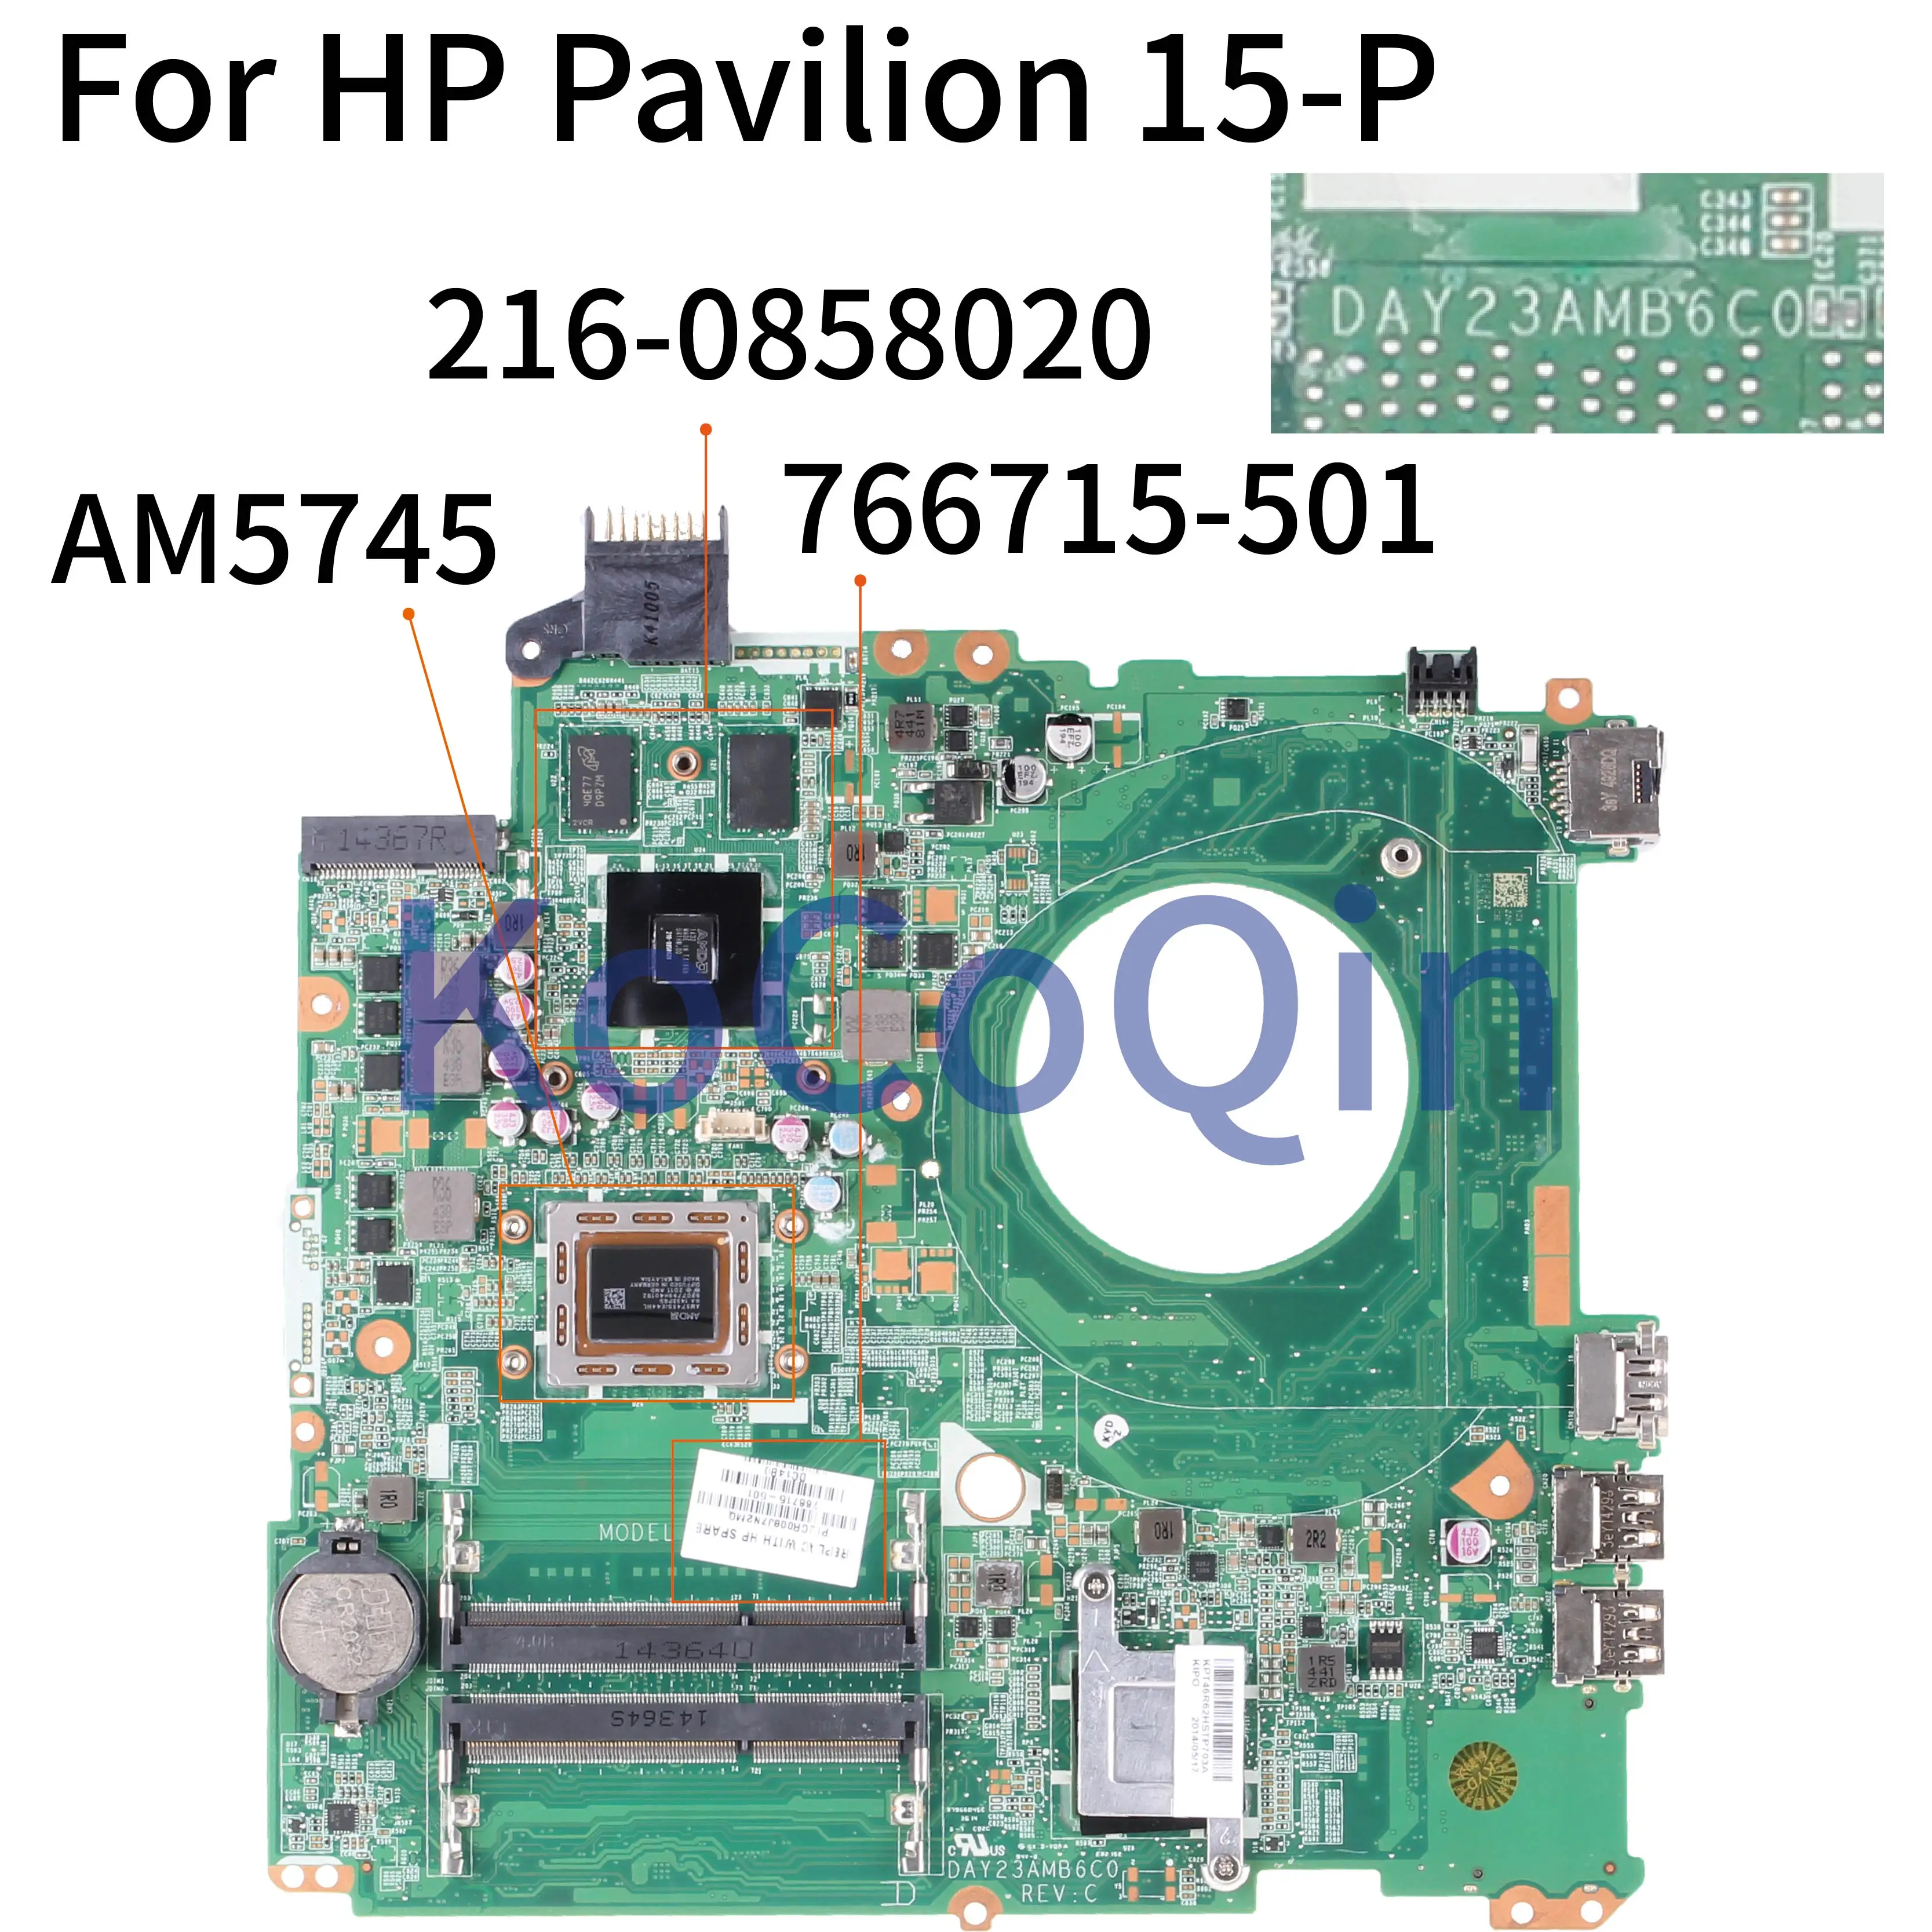 Seller  KoCoQin Laptop motherboard For HP Pavilion 15-P Series AM5745 216-0858020 Mainboard 766715-001 7667